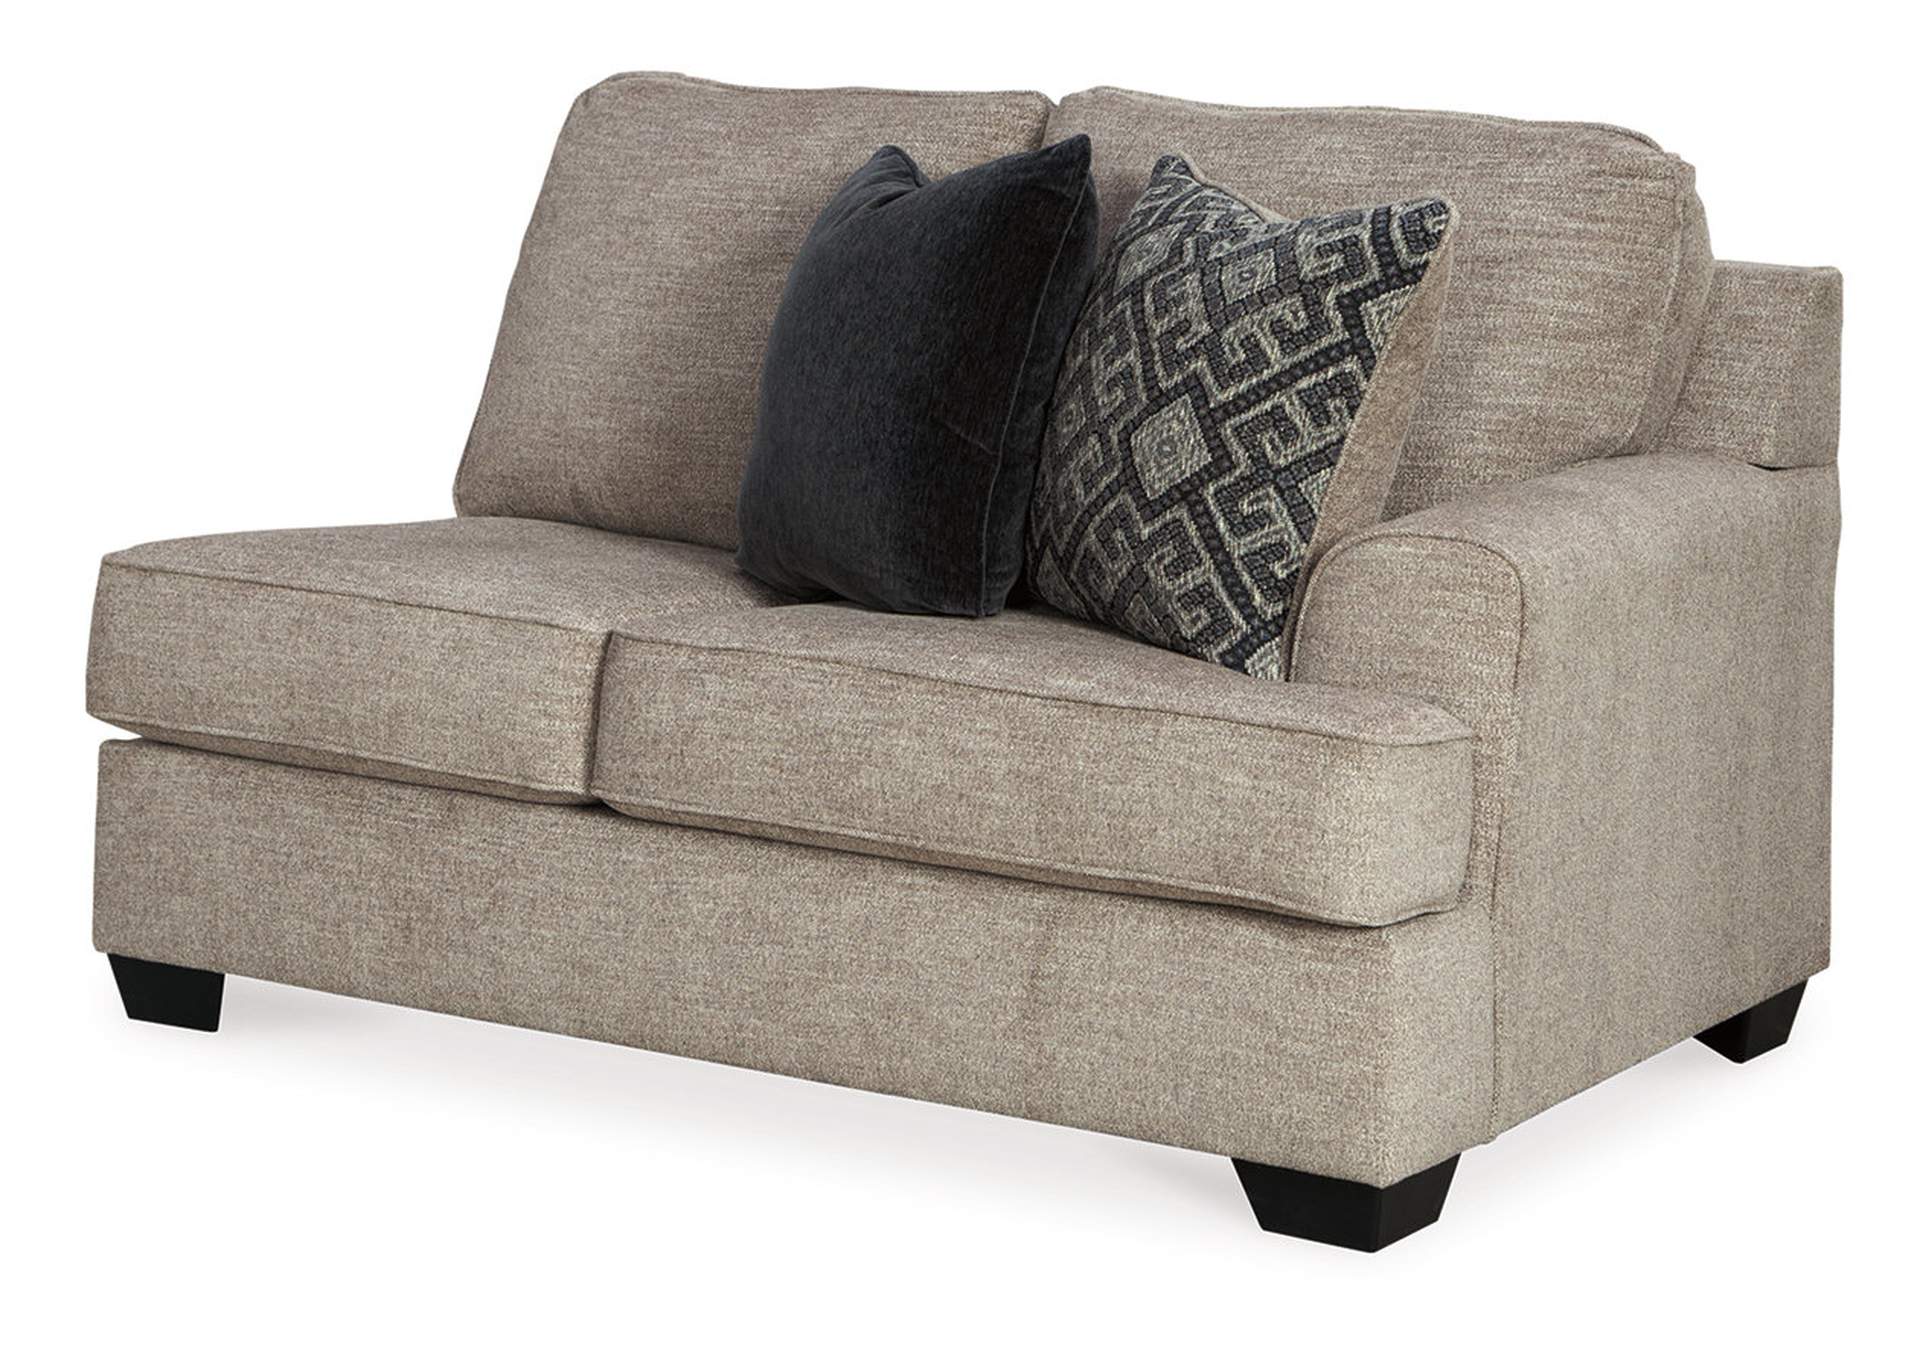 Bovarian Right-Arm Facing Loveseat,Signature Design By Ashley